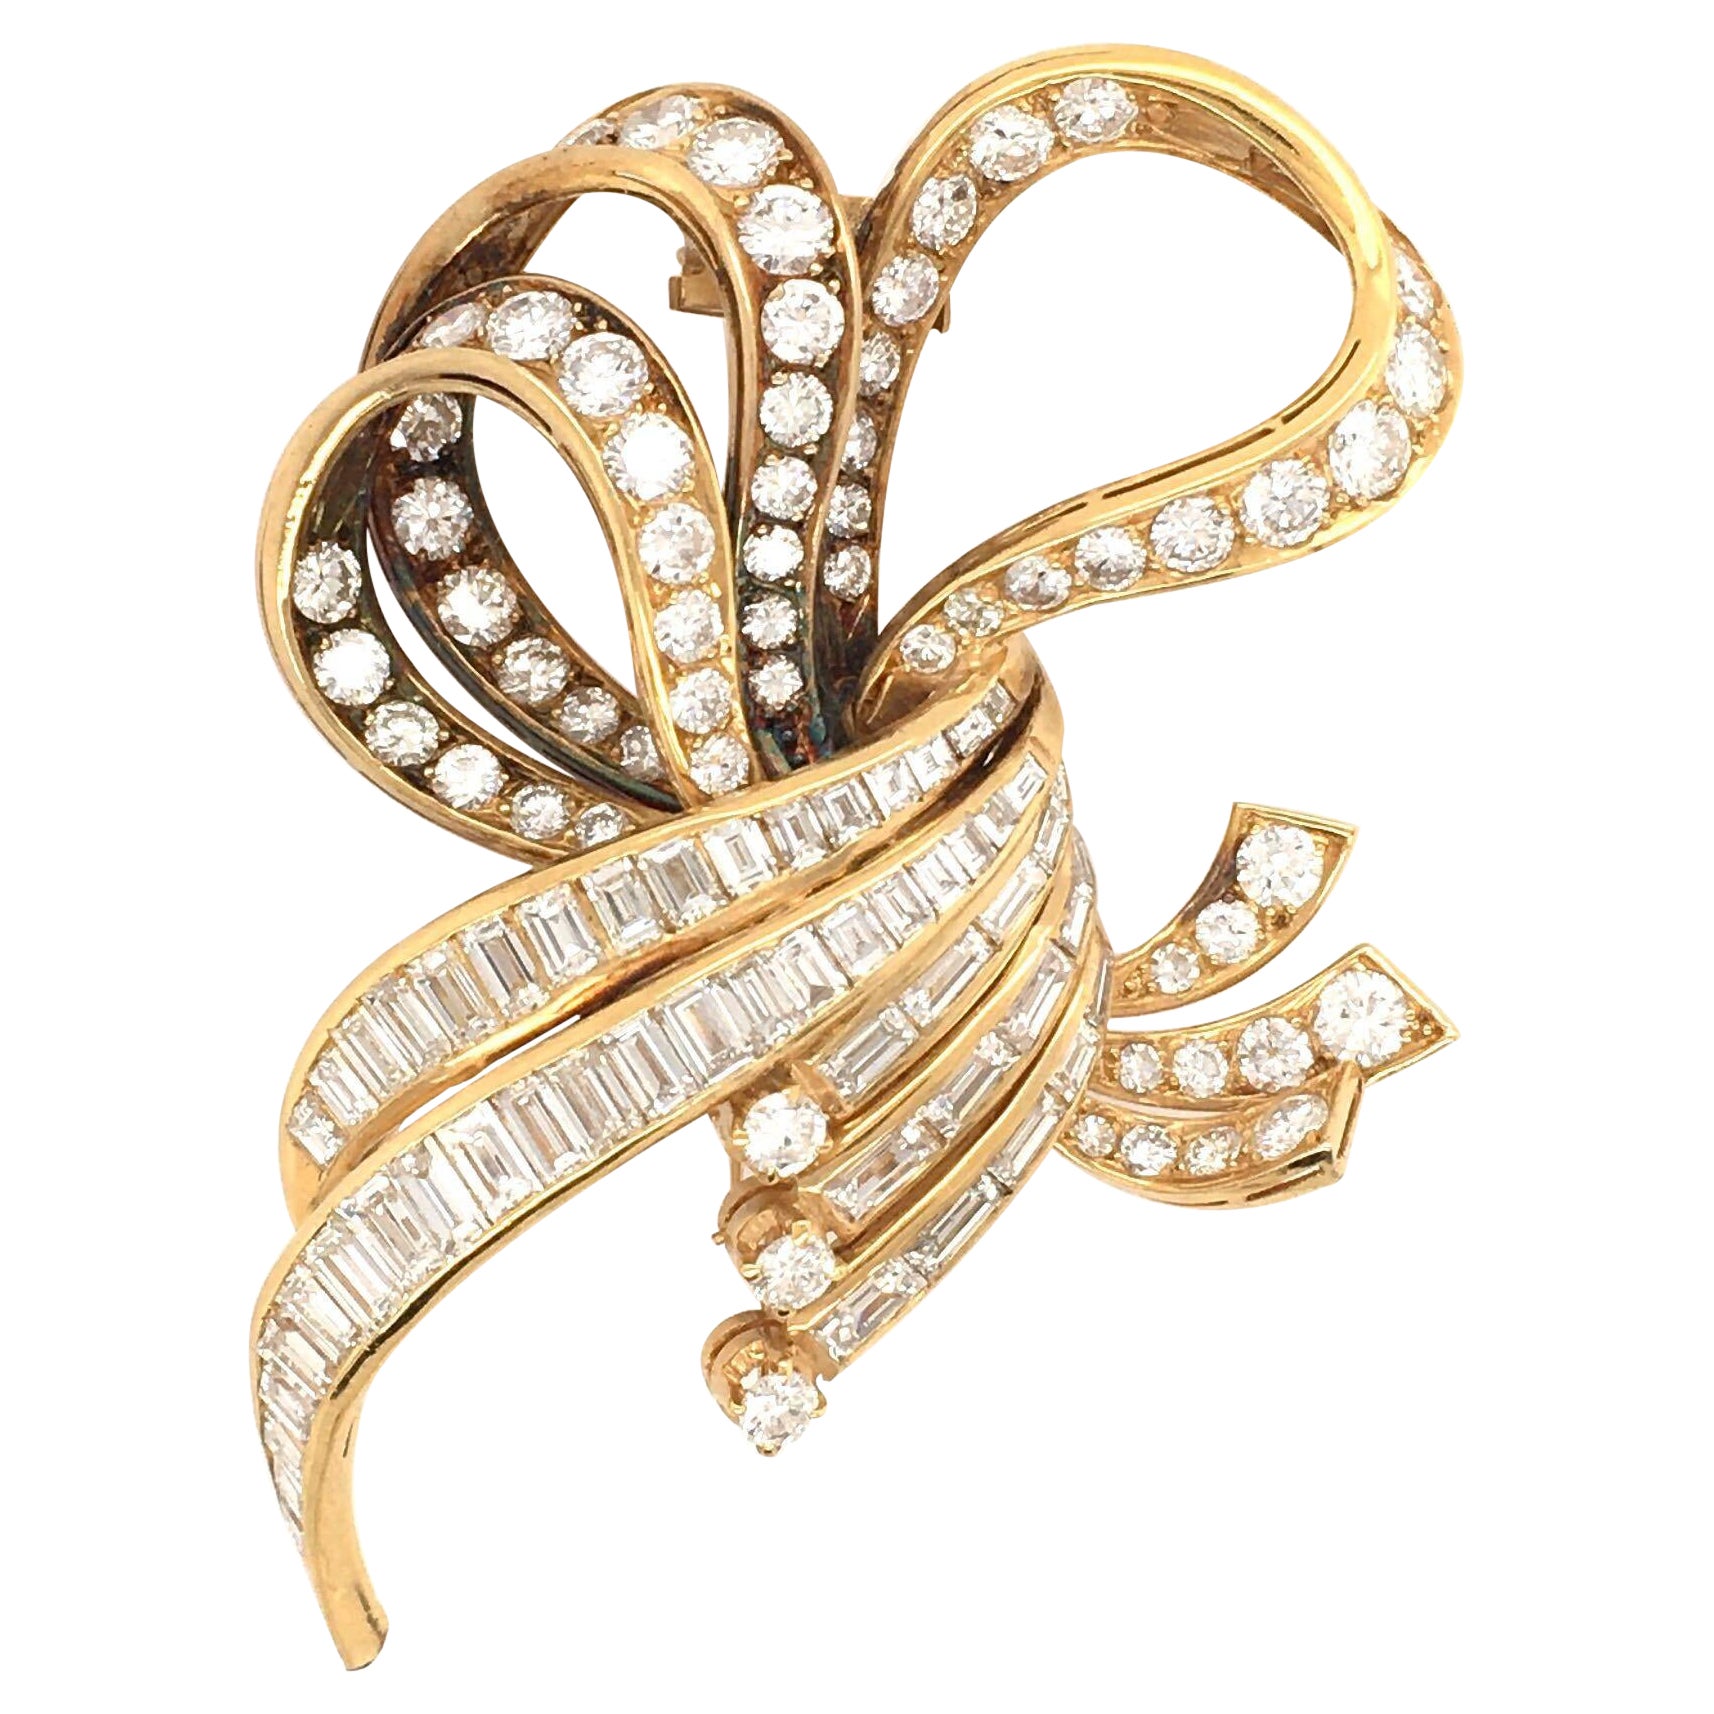 1964 Andrew Grima Gold and Diamond Brooch at 1stDibs